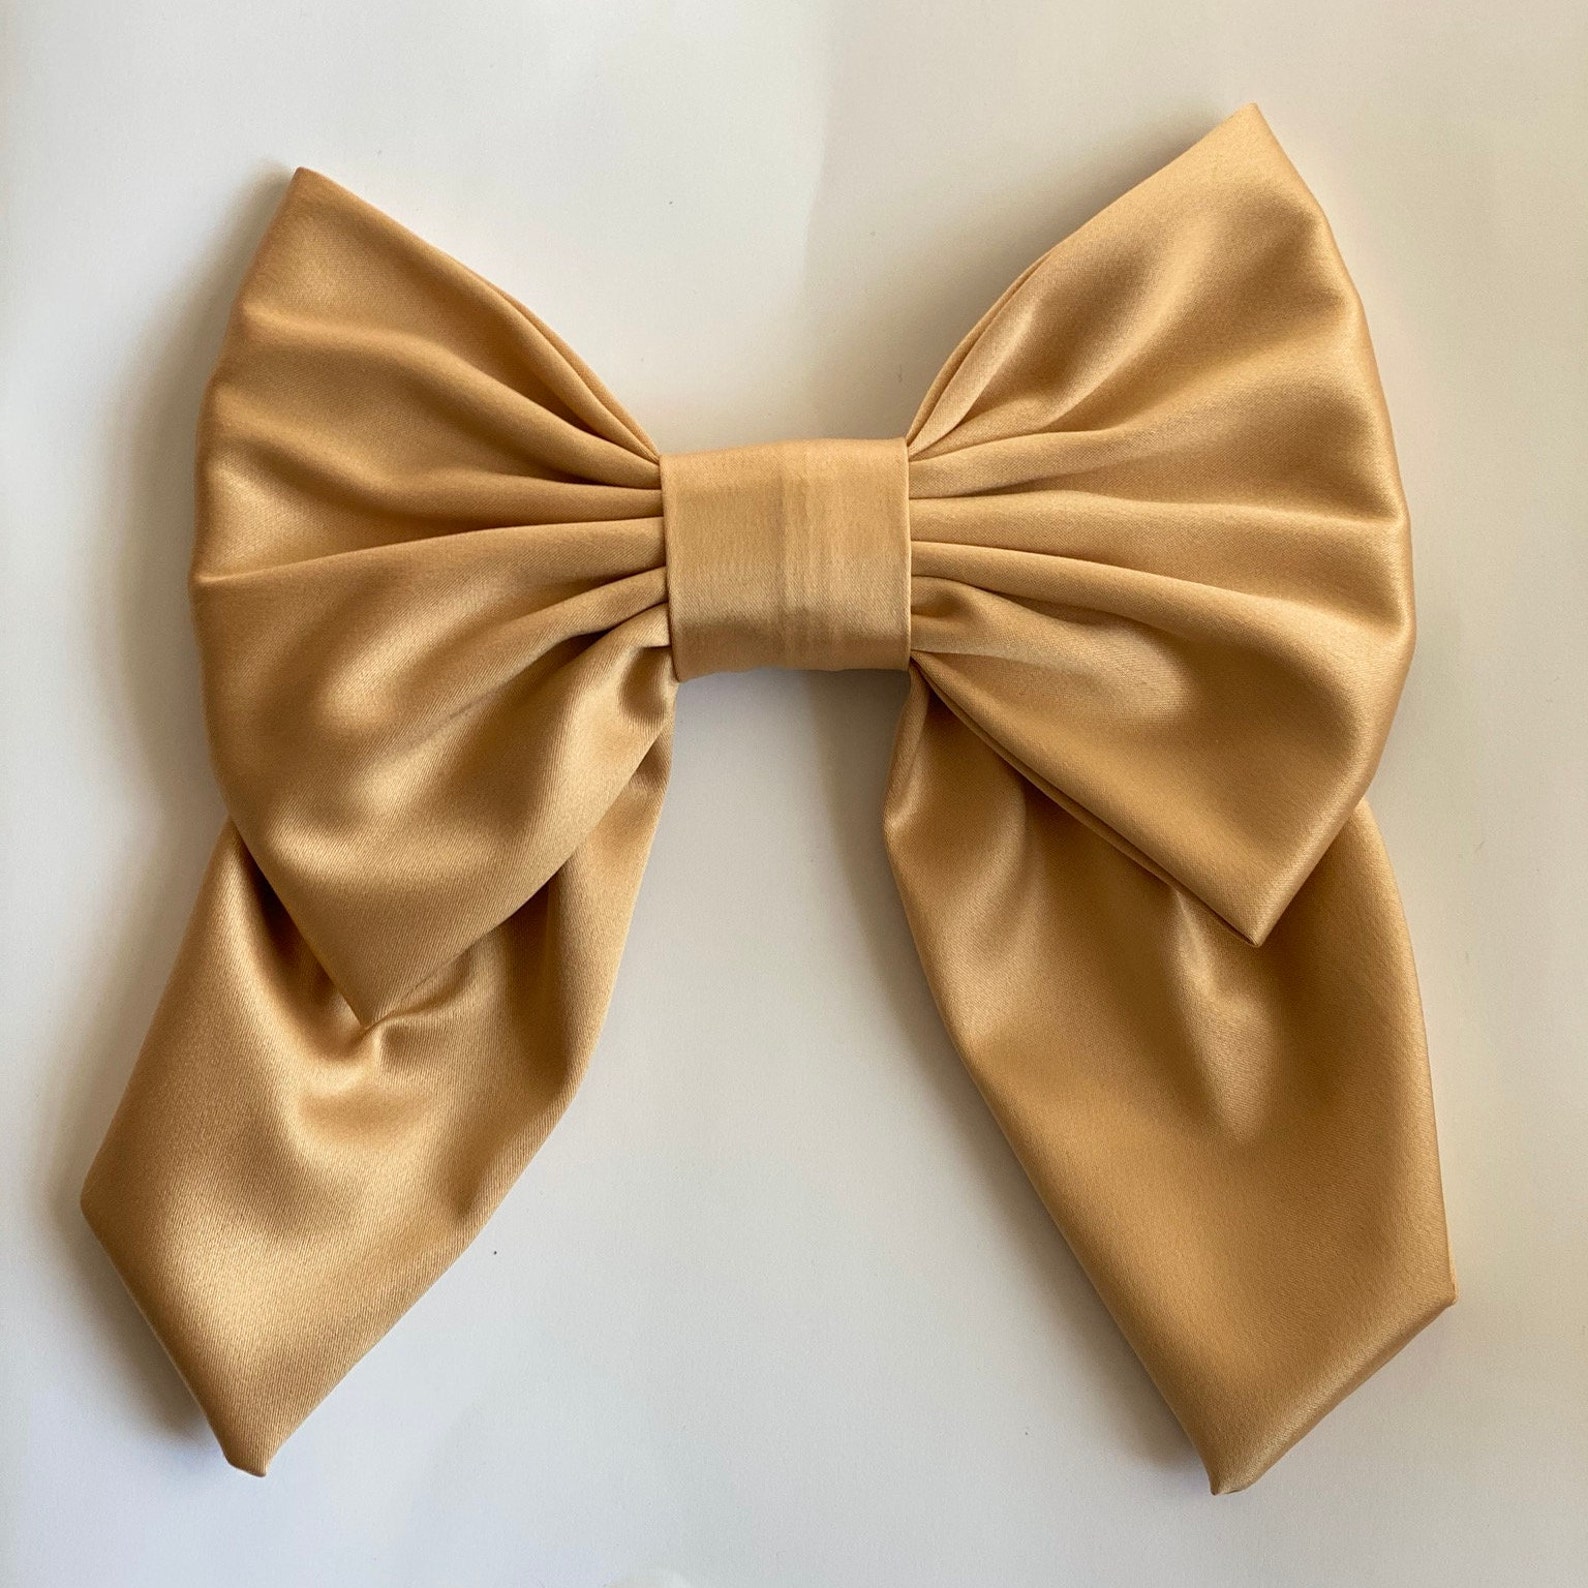 Satin gold Bow-LUXURY BOWS-Oversize Bow Long Bows Hair Tie | Etsy